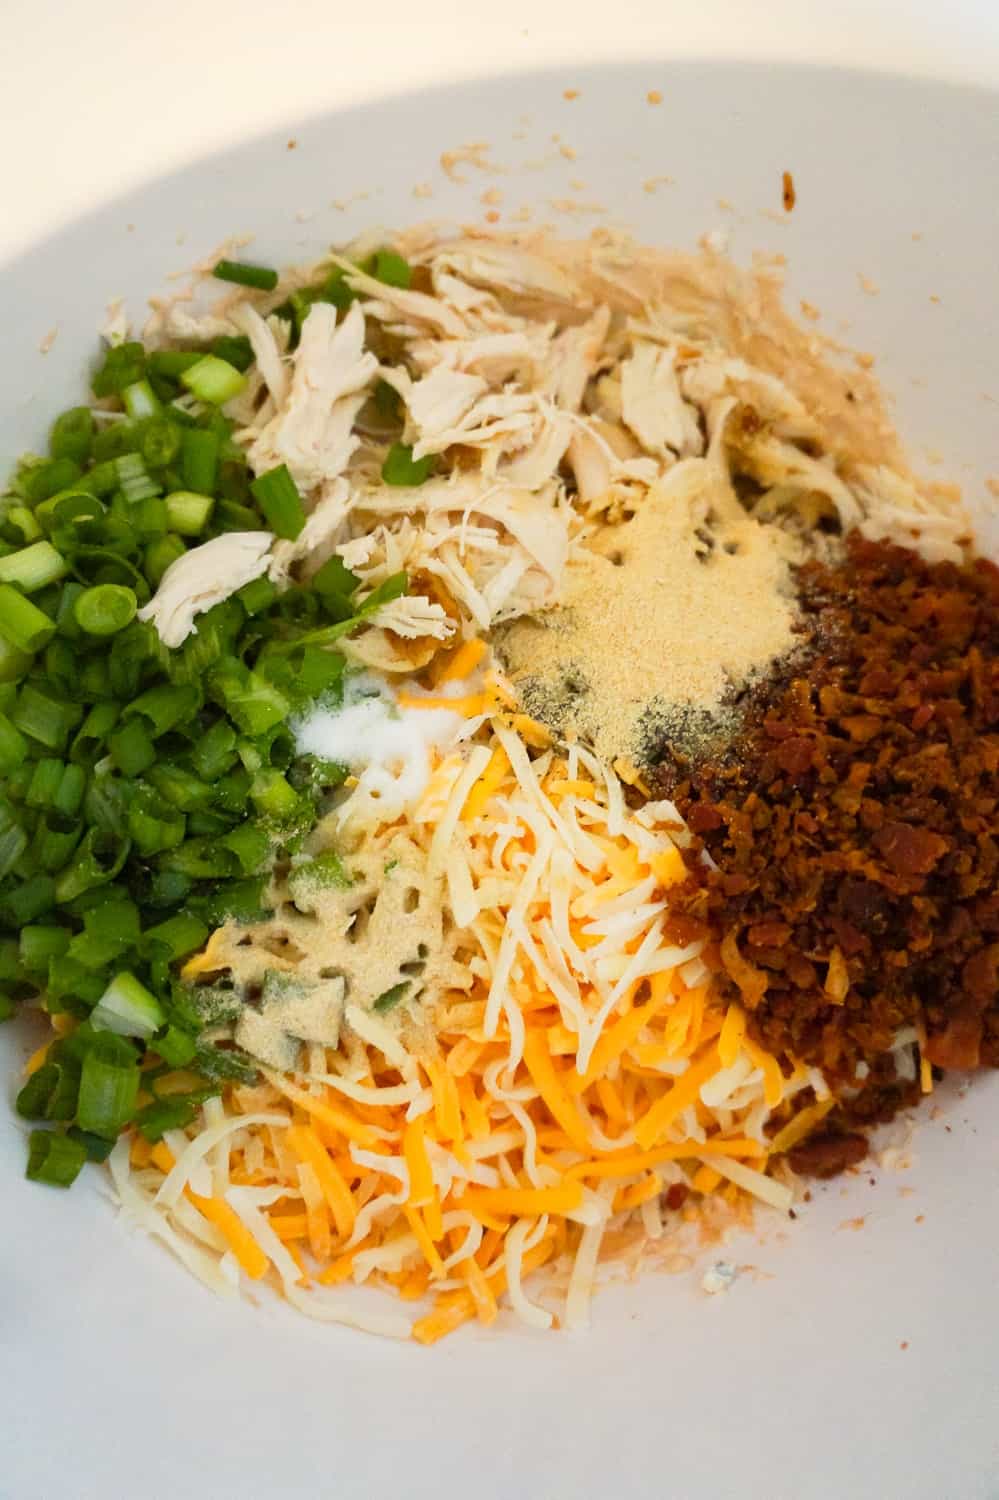 chopped green onions, crumbled bacon, shredded chicken and seasonings in a mixing bowl